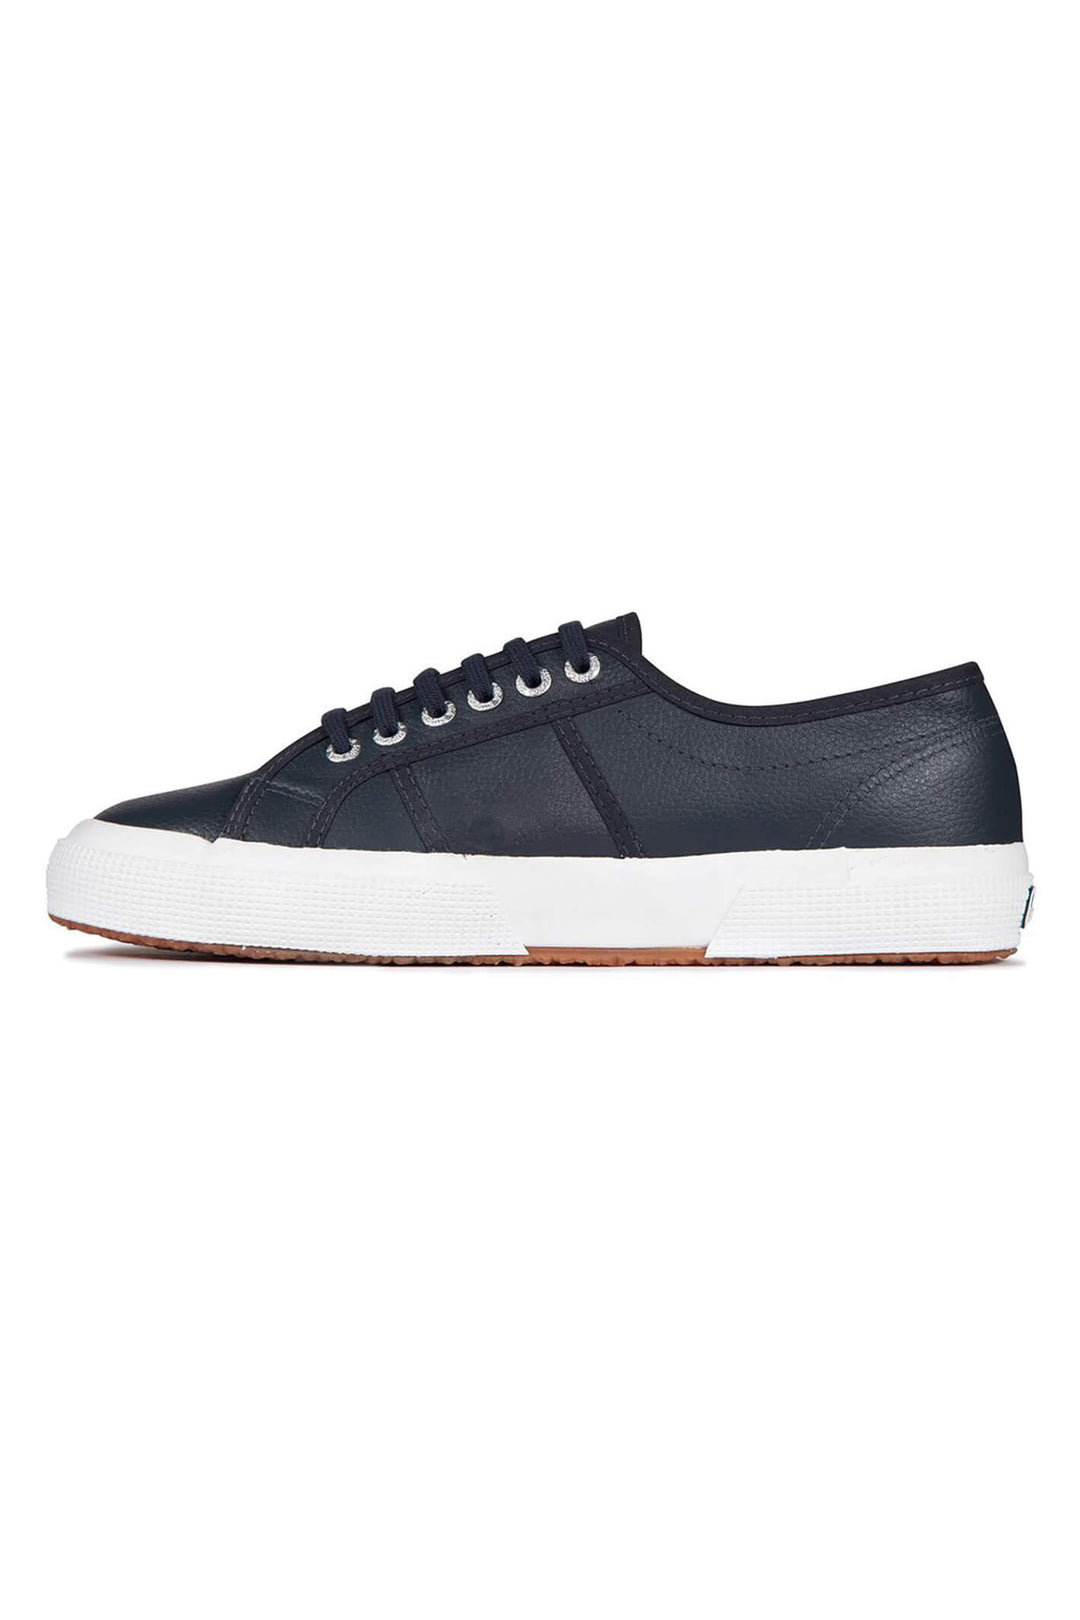 Superga 2750 S009VH0 070 Navy Leather Trainer